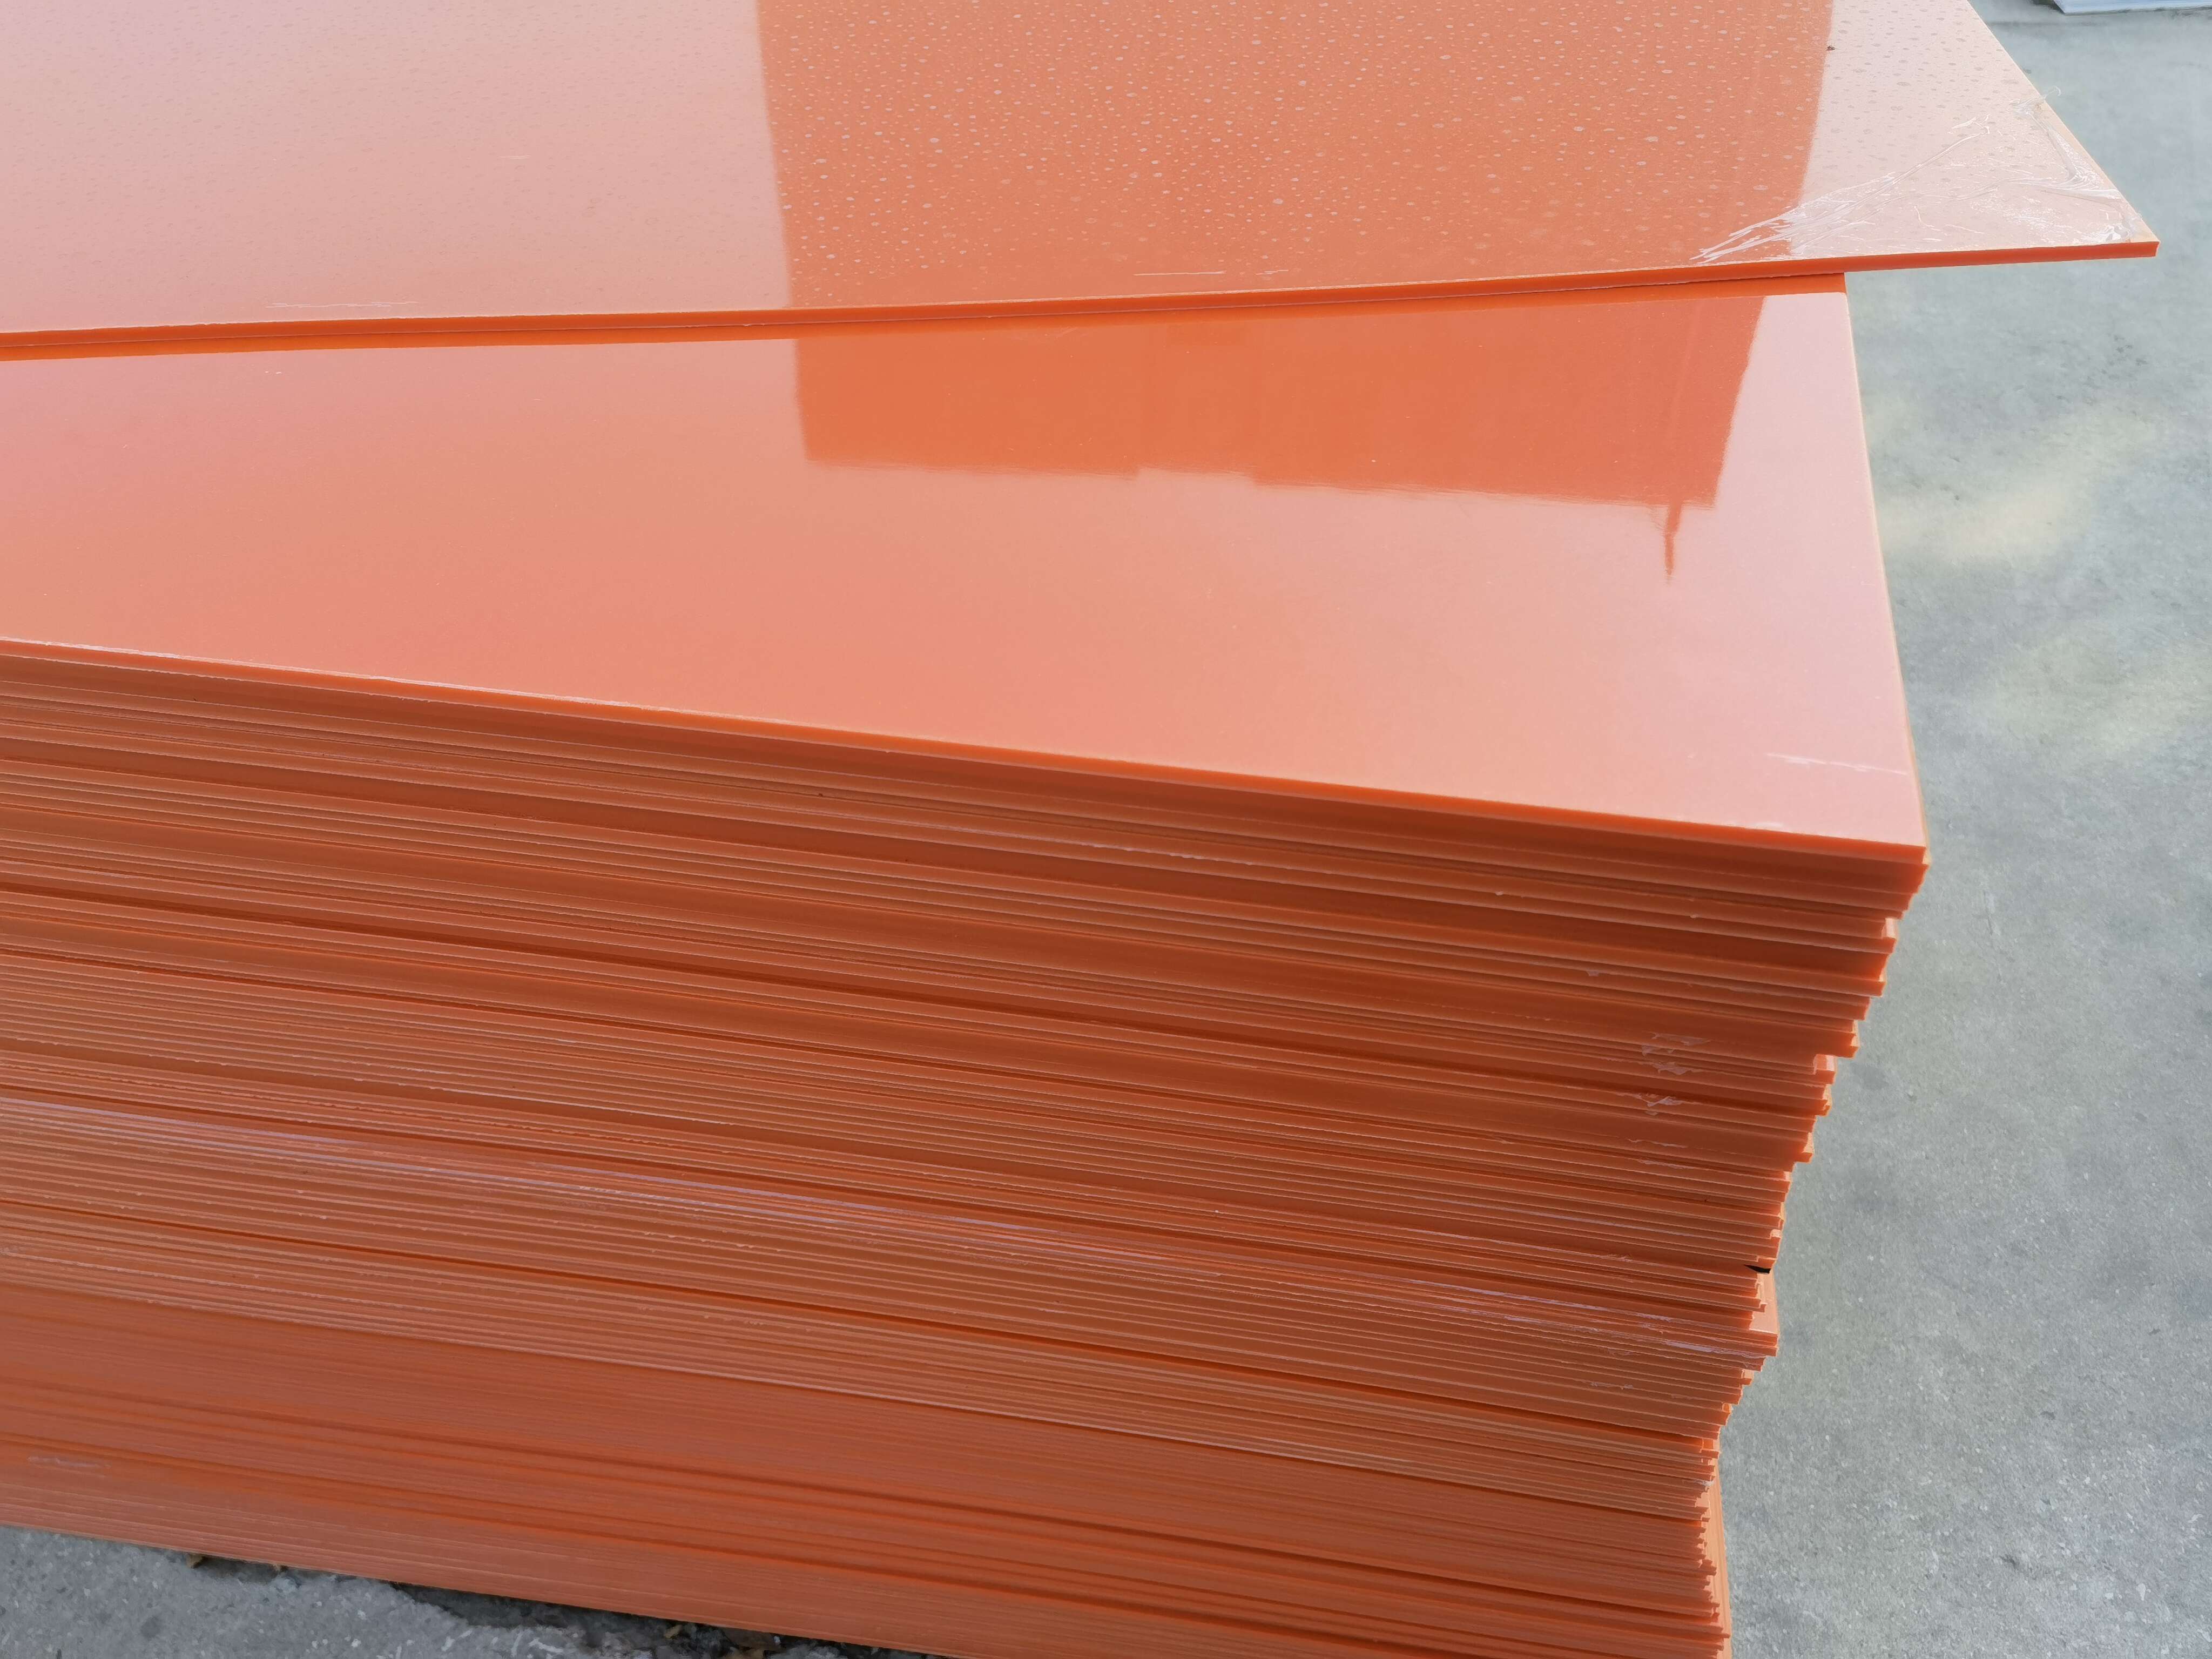 Extruded plastic HDPE sheet / plate / panel supplier